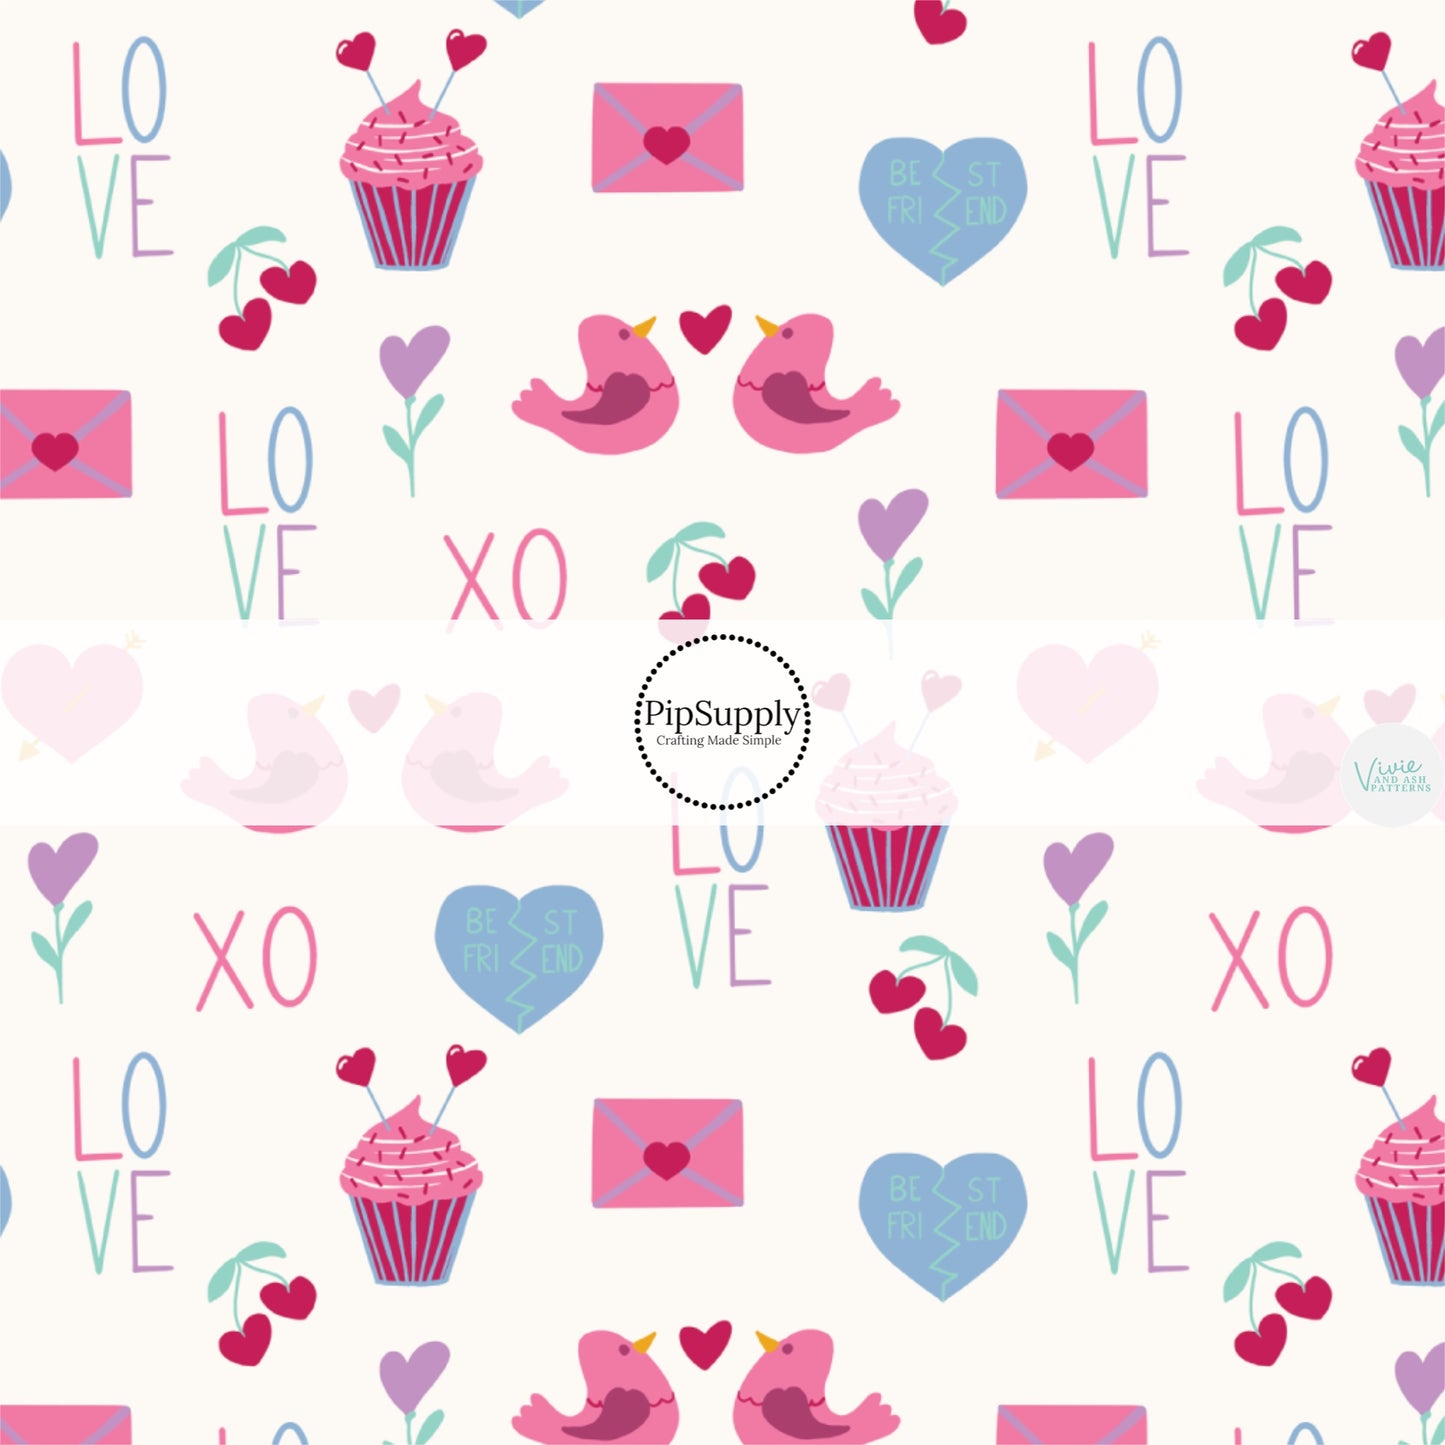 Love and xoxo sayings, pink love birds, cucakes, heart flowers, cherries, pink letters, and best friend heart on cream hair bow strips